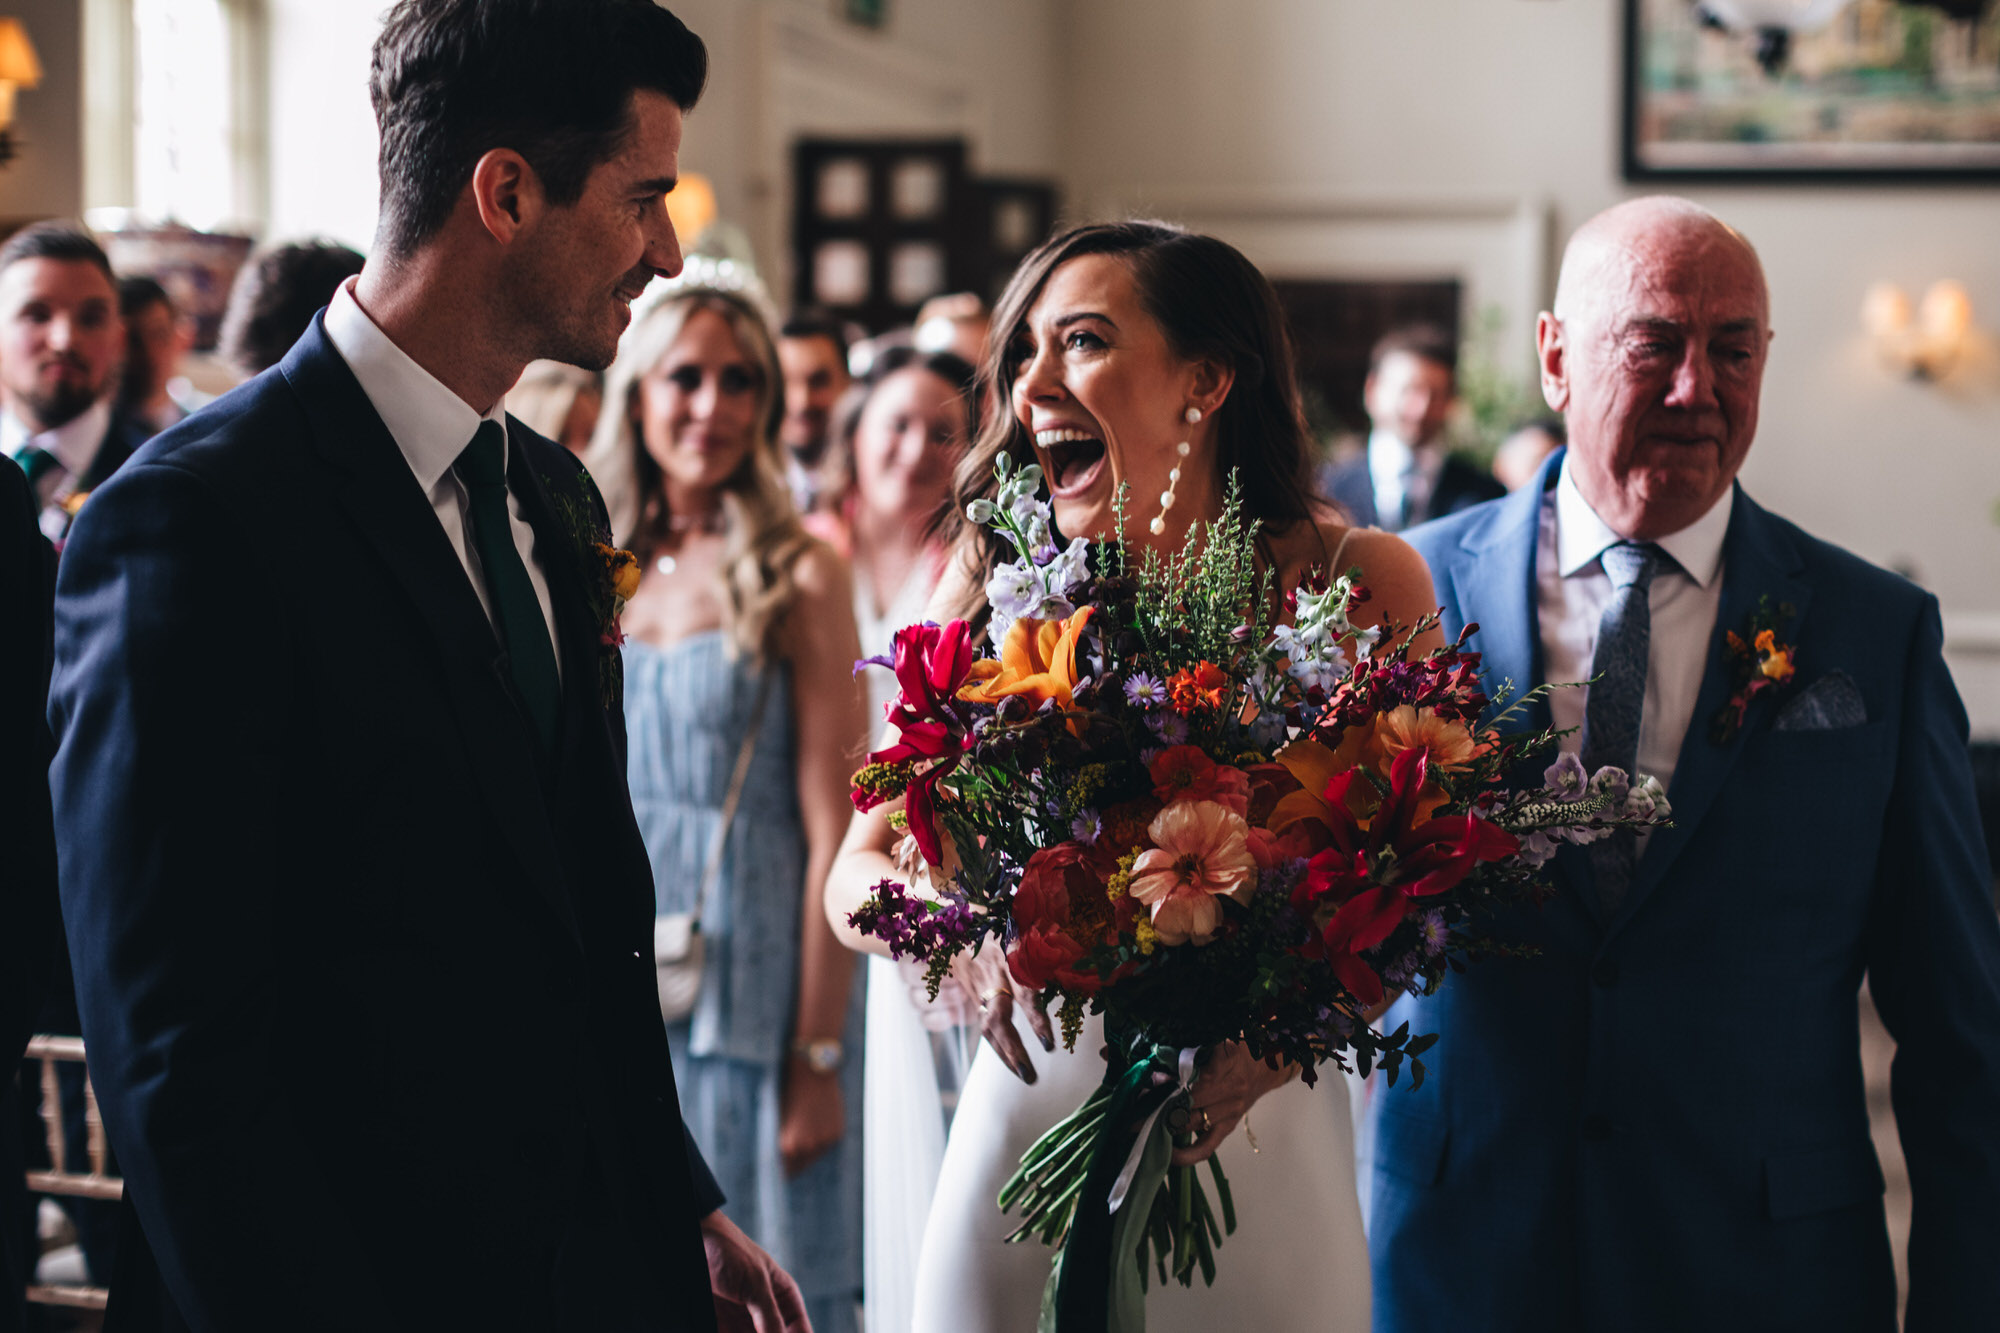 bride with big smile for groom at ceremony, holding Wren and May wedding bouquet flowers